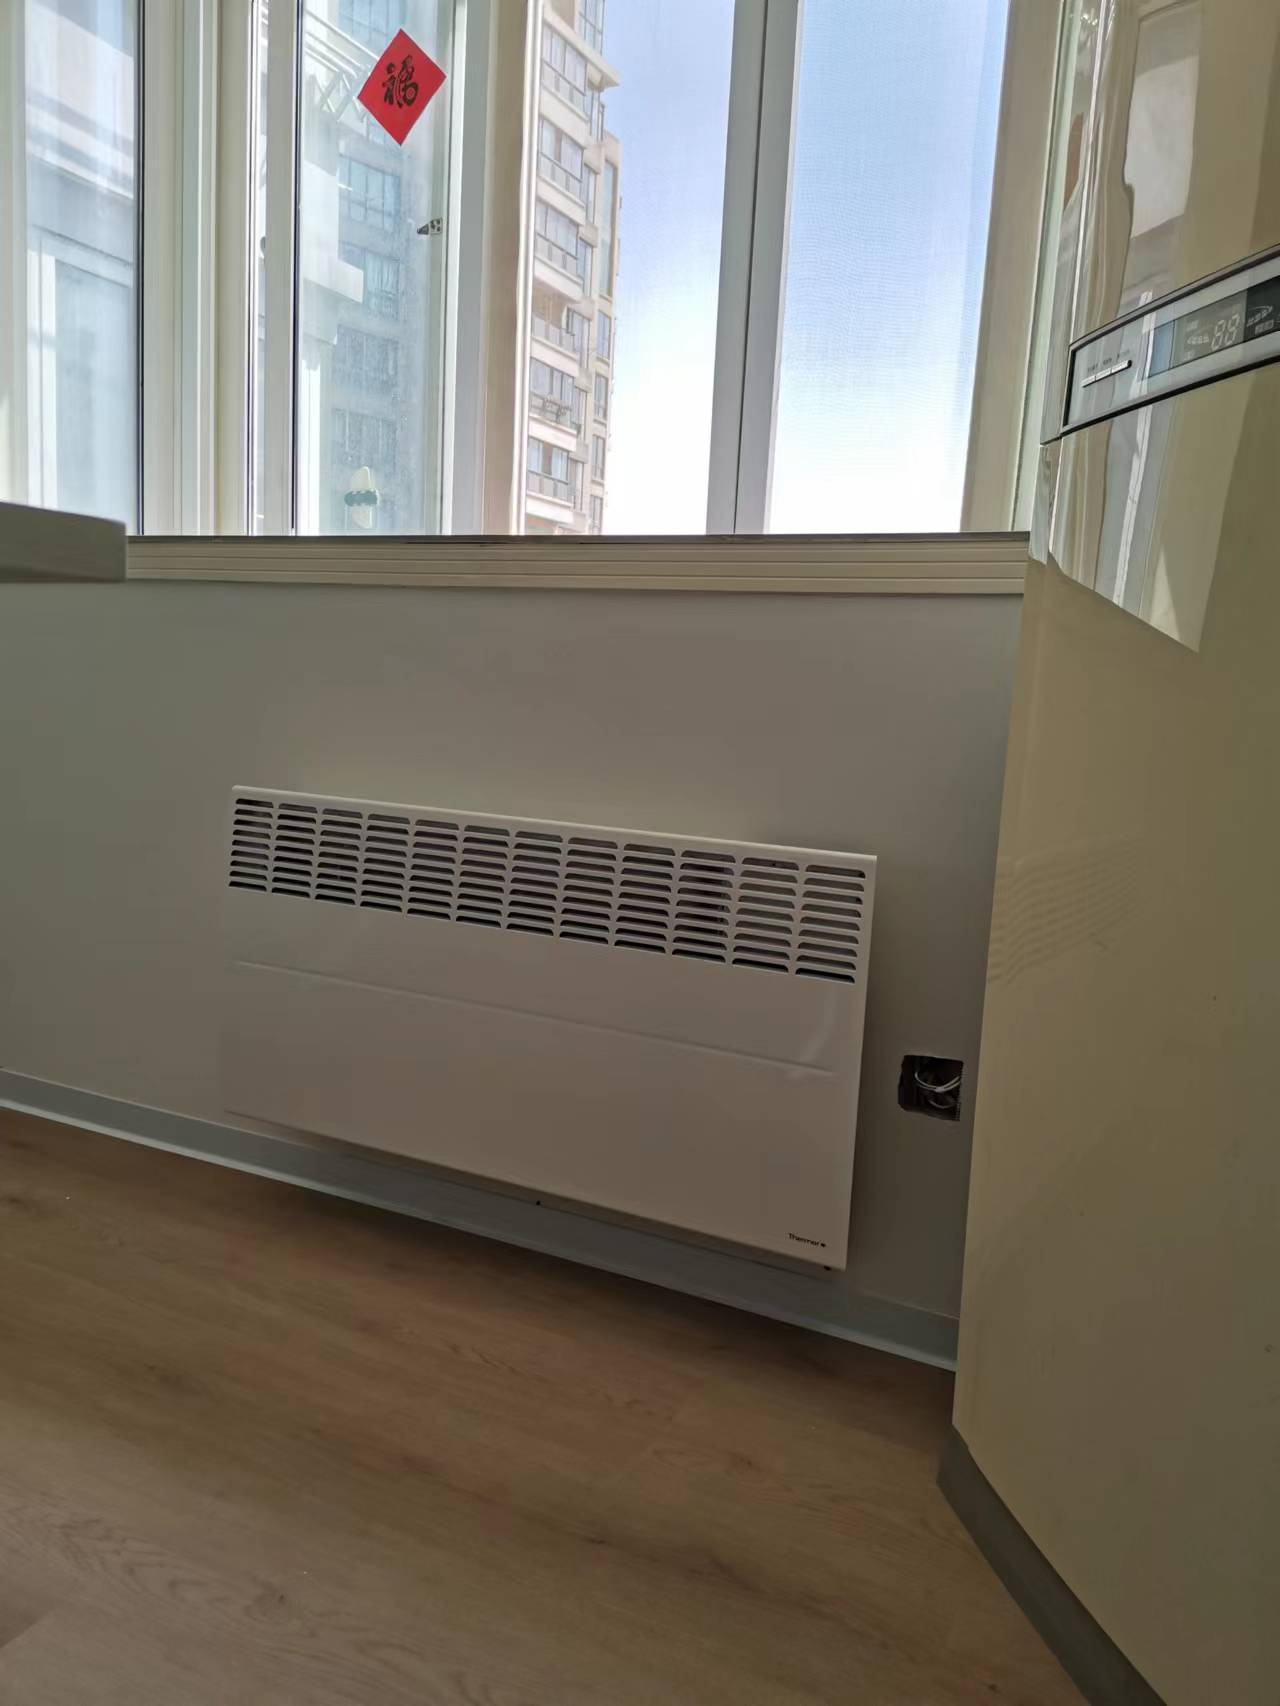 Renovation of radiators, refined decoration and installation of electric heaters, wall mounted heating pads, Saimon, France